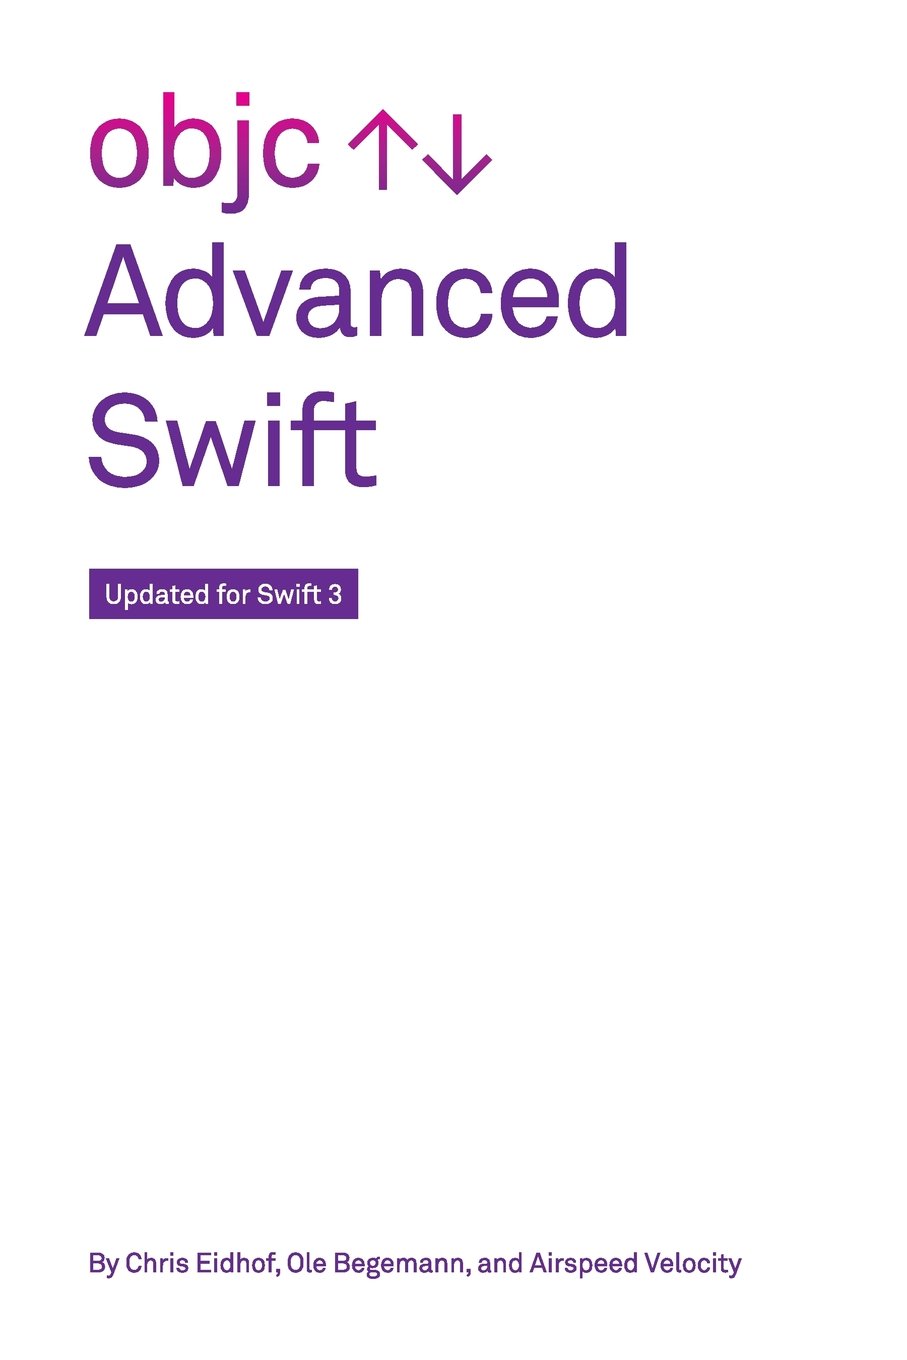 Advanced Swift: Updated for Swift 3 by Chris Eidhof, Ole Begemann, Airspeed Velocity